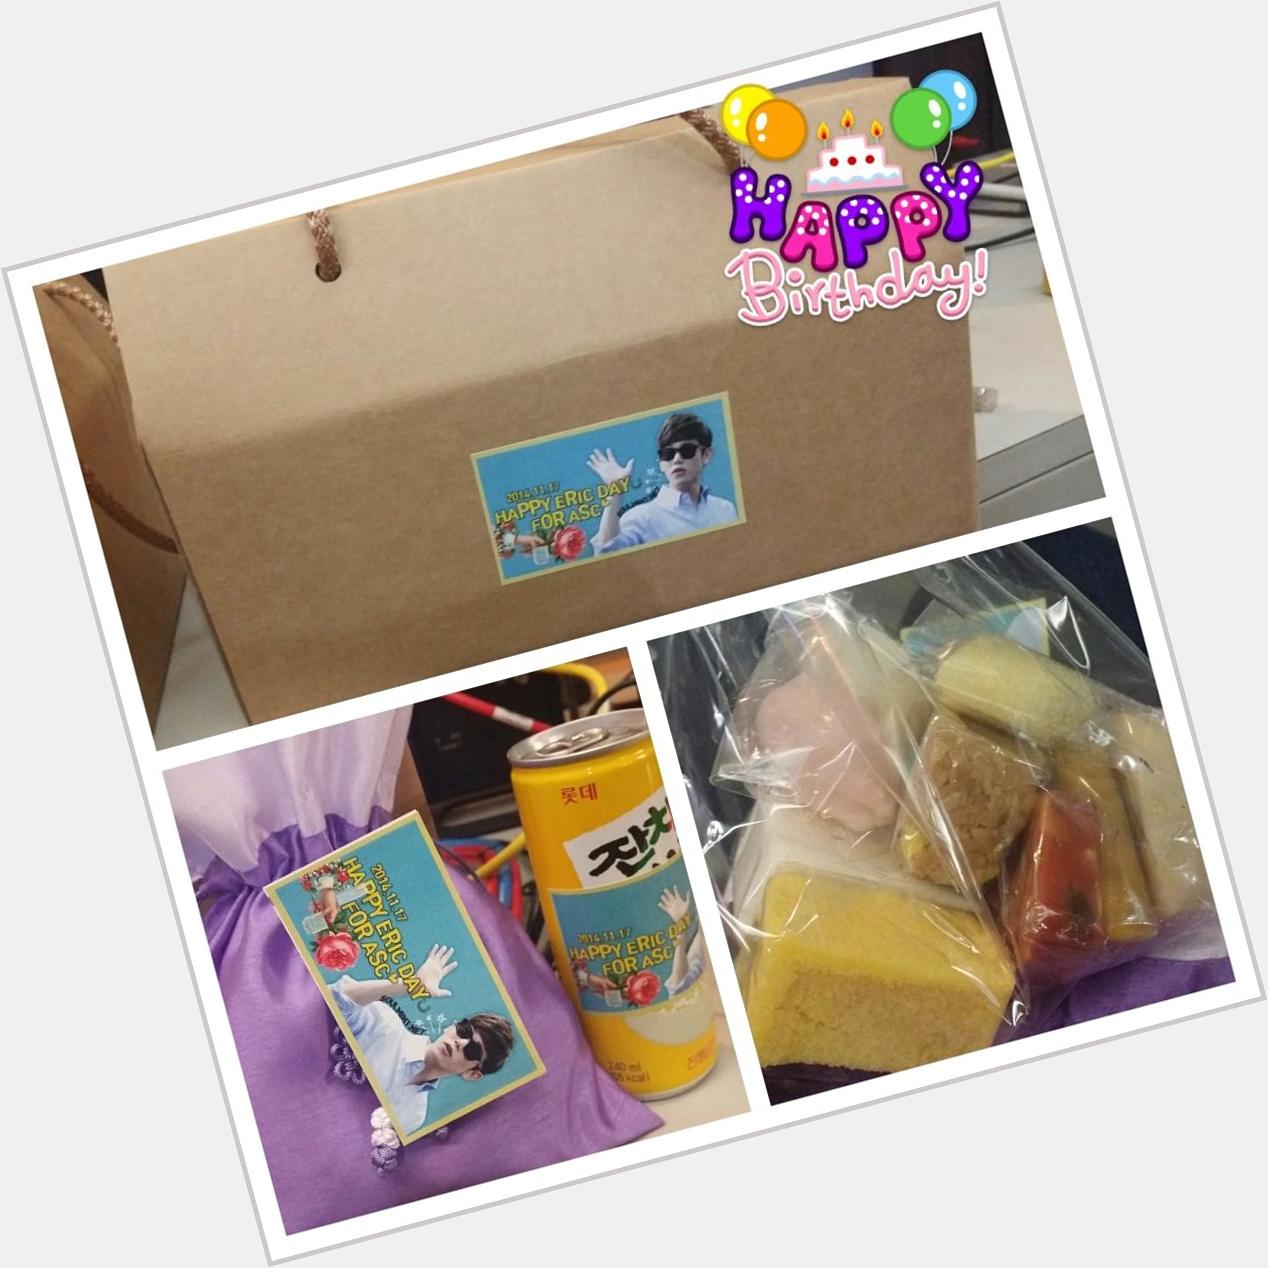 Happy birthday to the MC Eric Nam (   ) &thank you fans for the lovely snacks&drinks!  